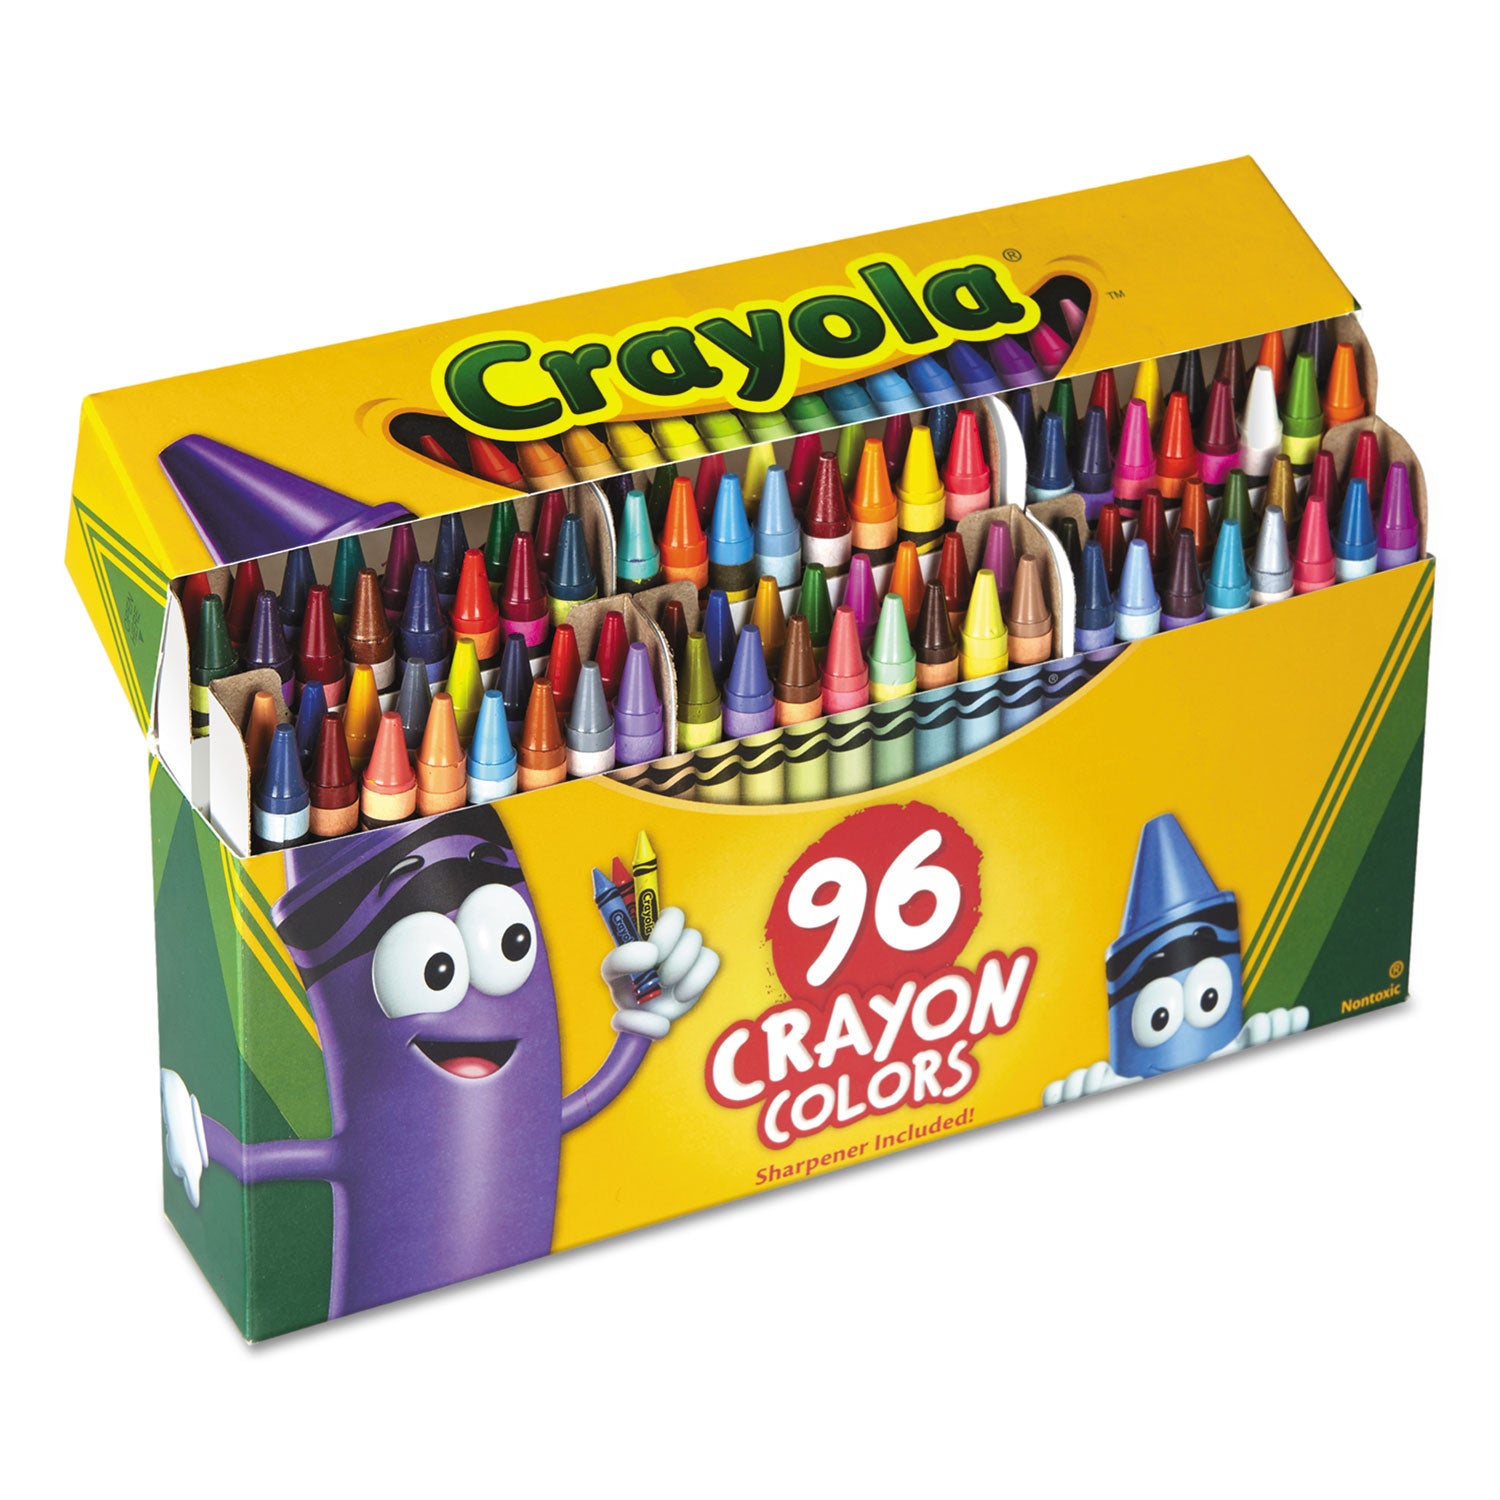 Classic Color Crayons in Flip-Top Pack with Sharpener, 96 Colors/Pack - 